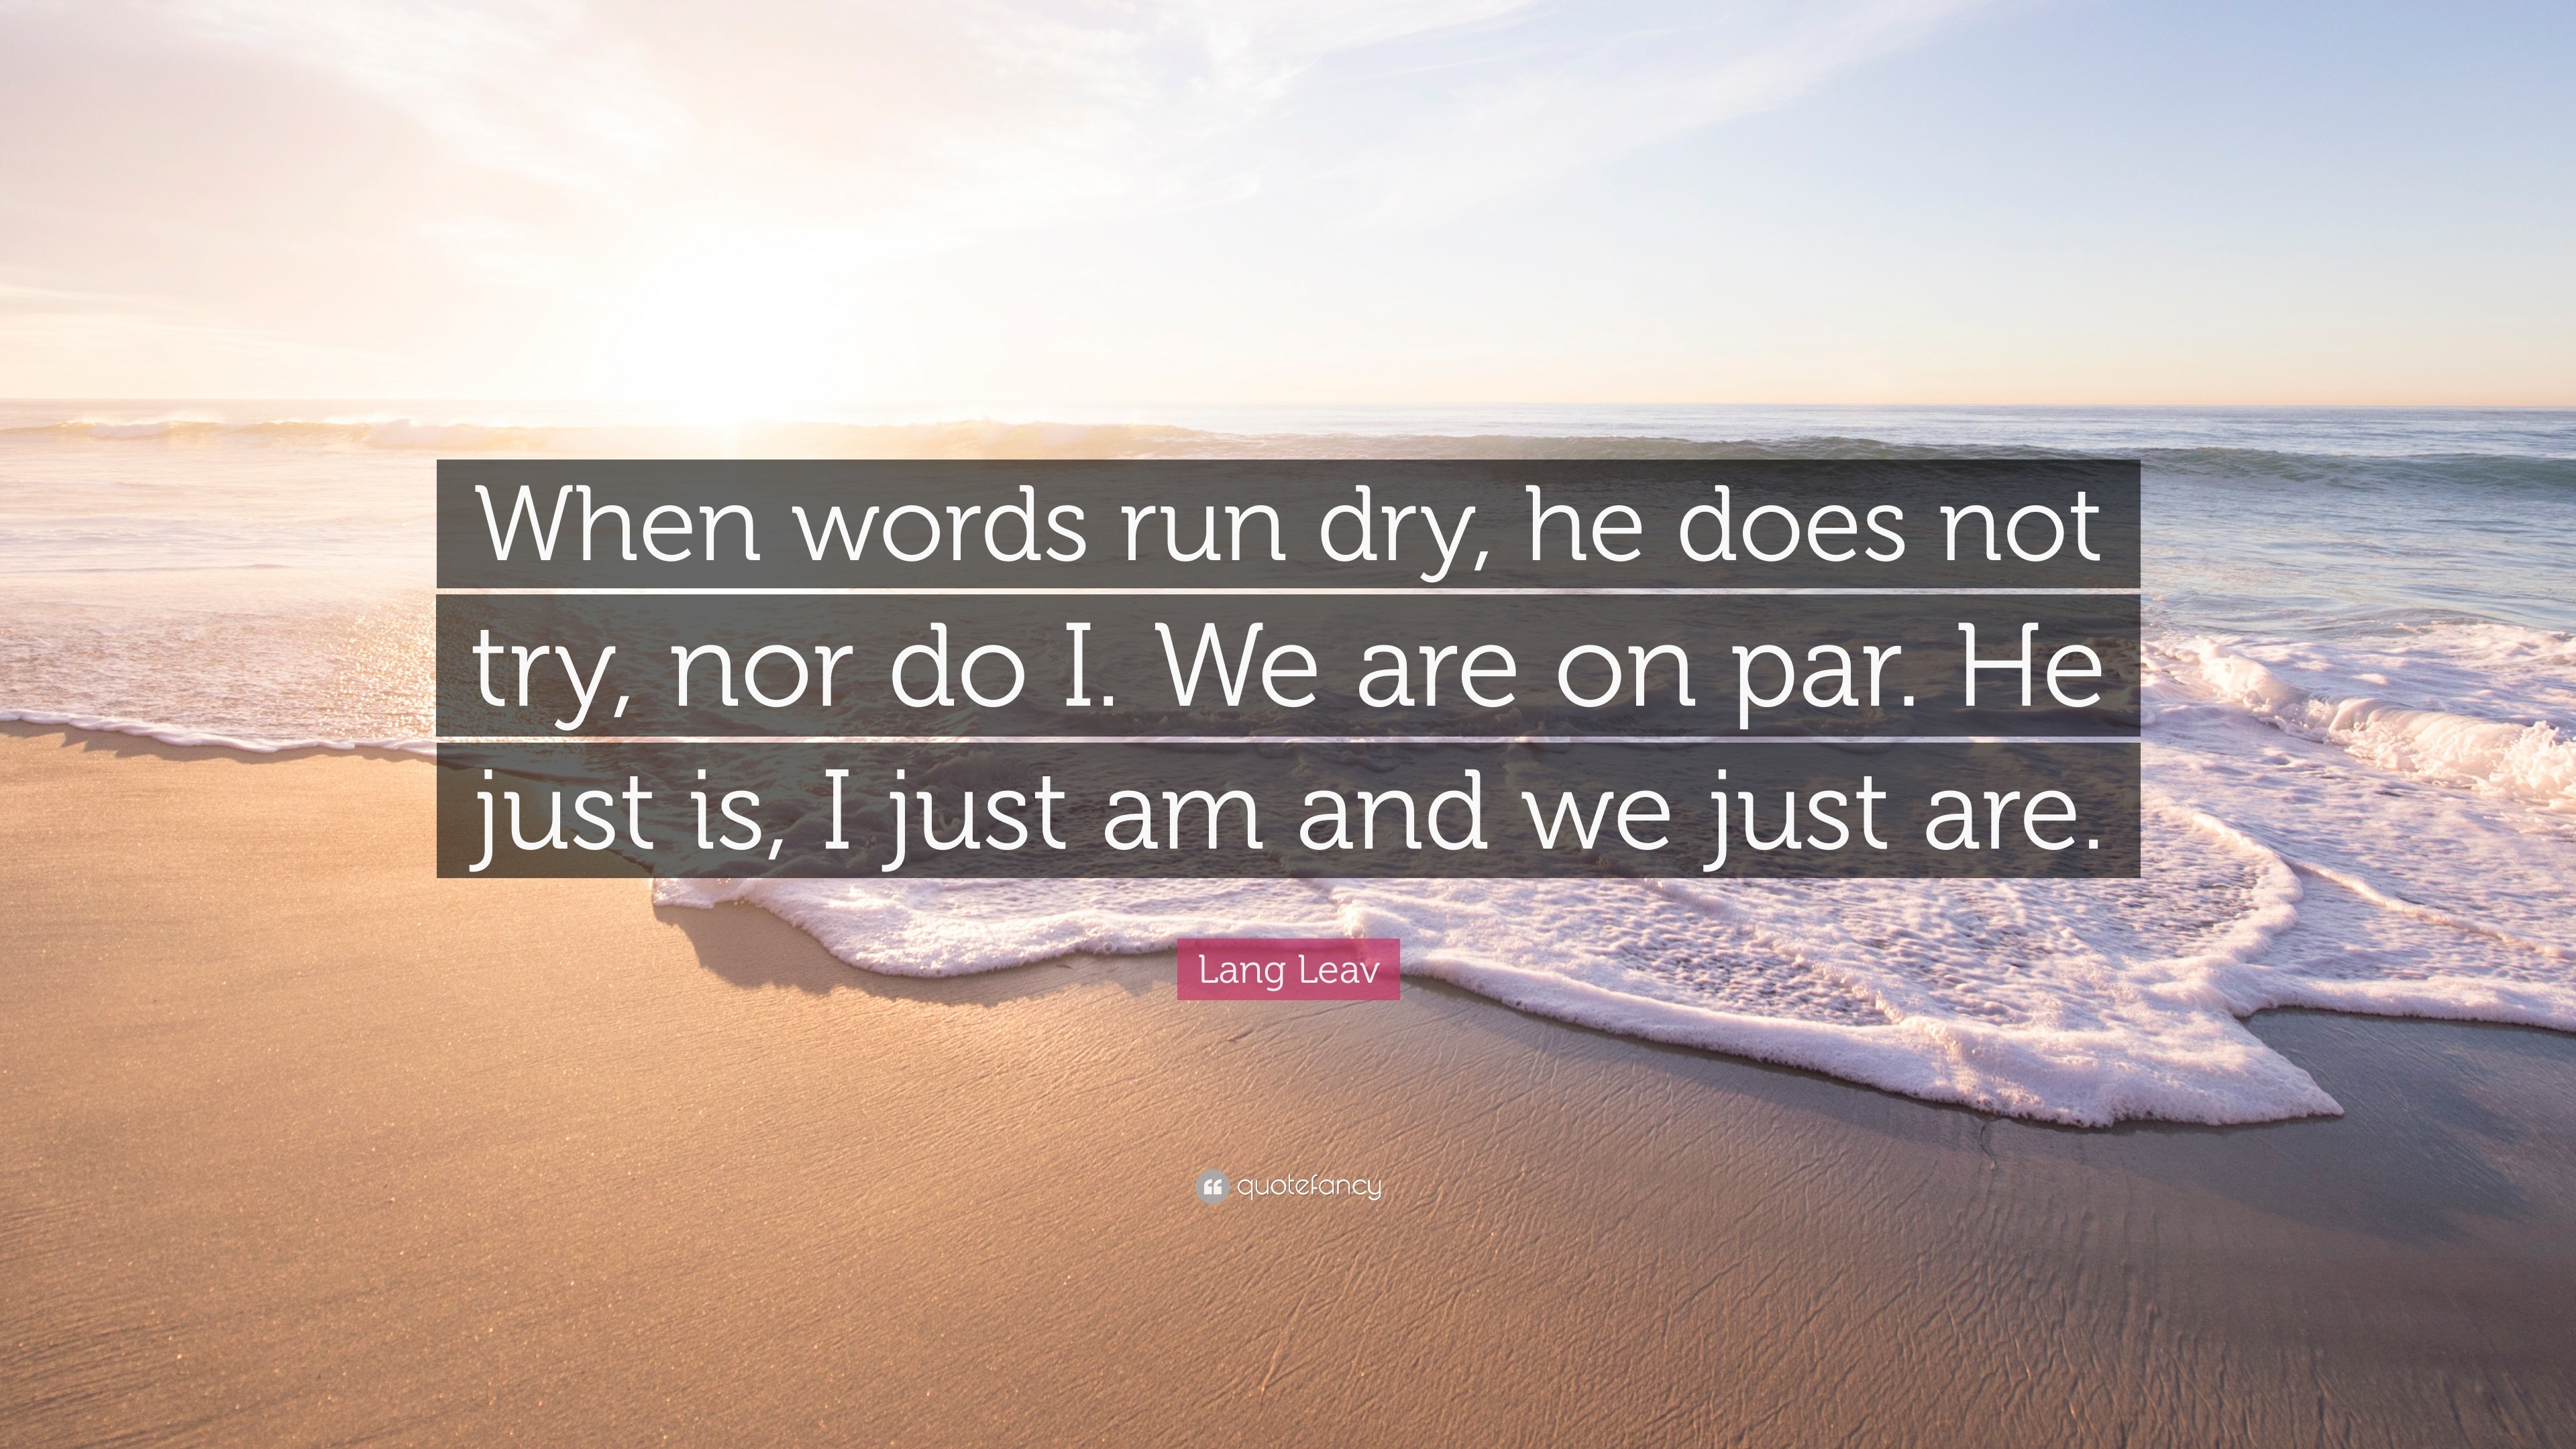 https://quotefancy.com/media/wallpaper/3840x2160/1871823-Lang-Leav-Quote-When-words-run-dry-he-does-not-try-nor-do-I-We-are.jpg